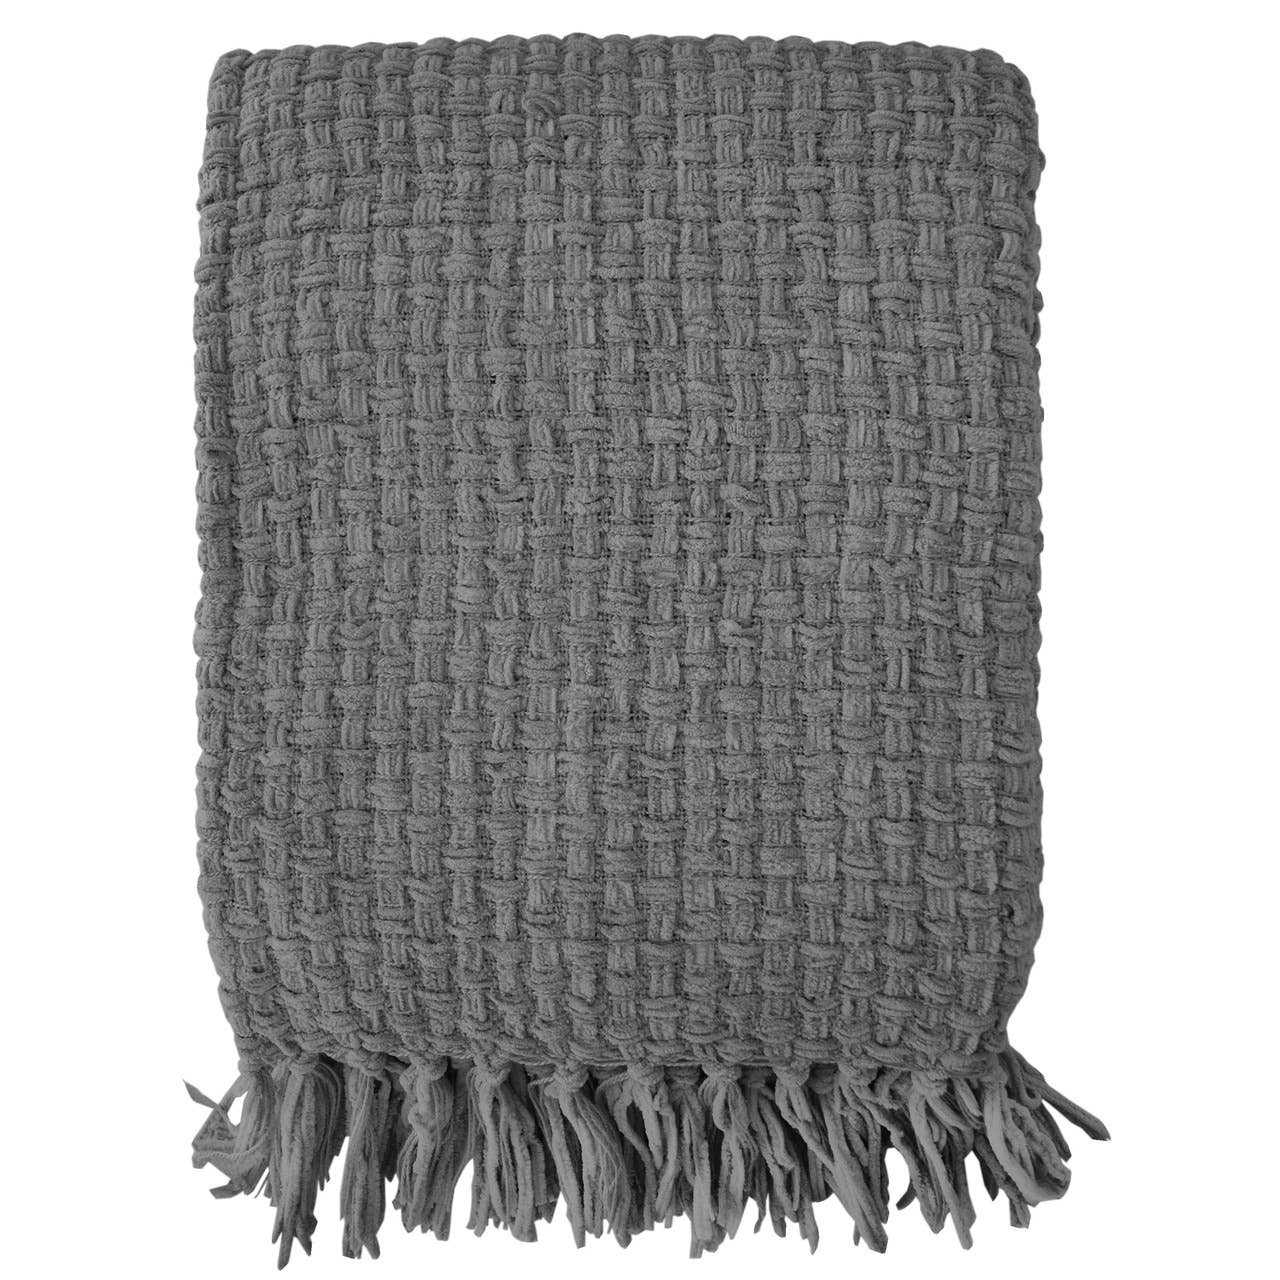 Fabstyles Chenille Basket Weave Grey Throw Blanket, 50x60